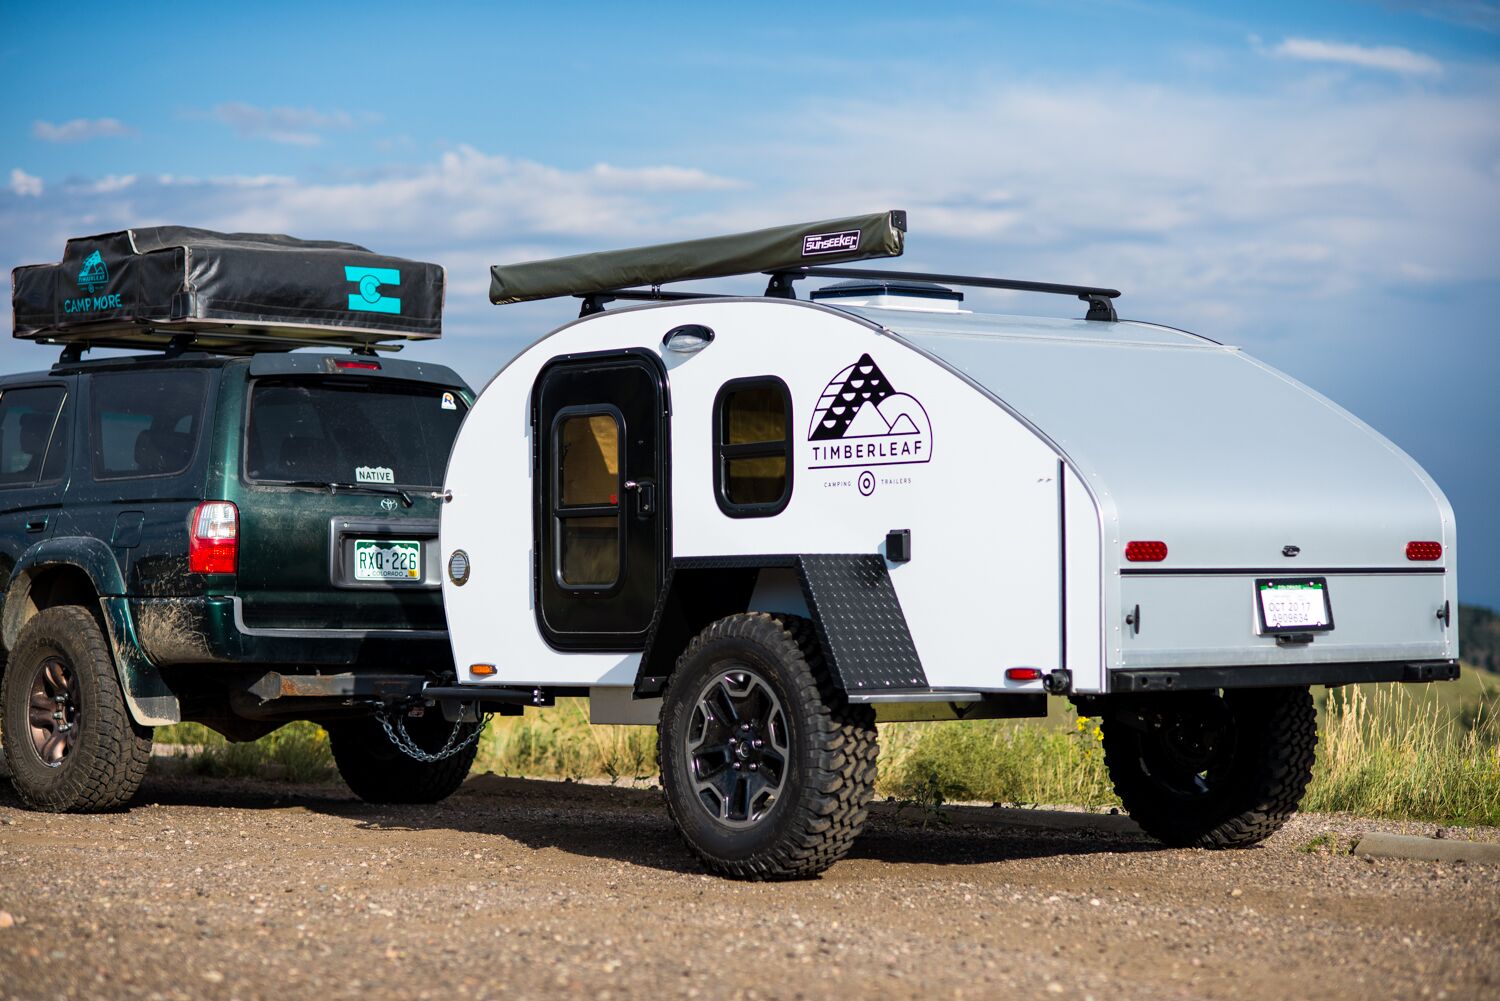 Timberleaf Camping Trailers | The Coolector